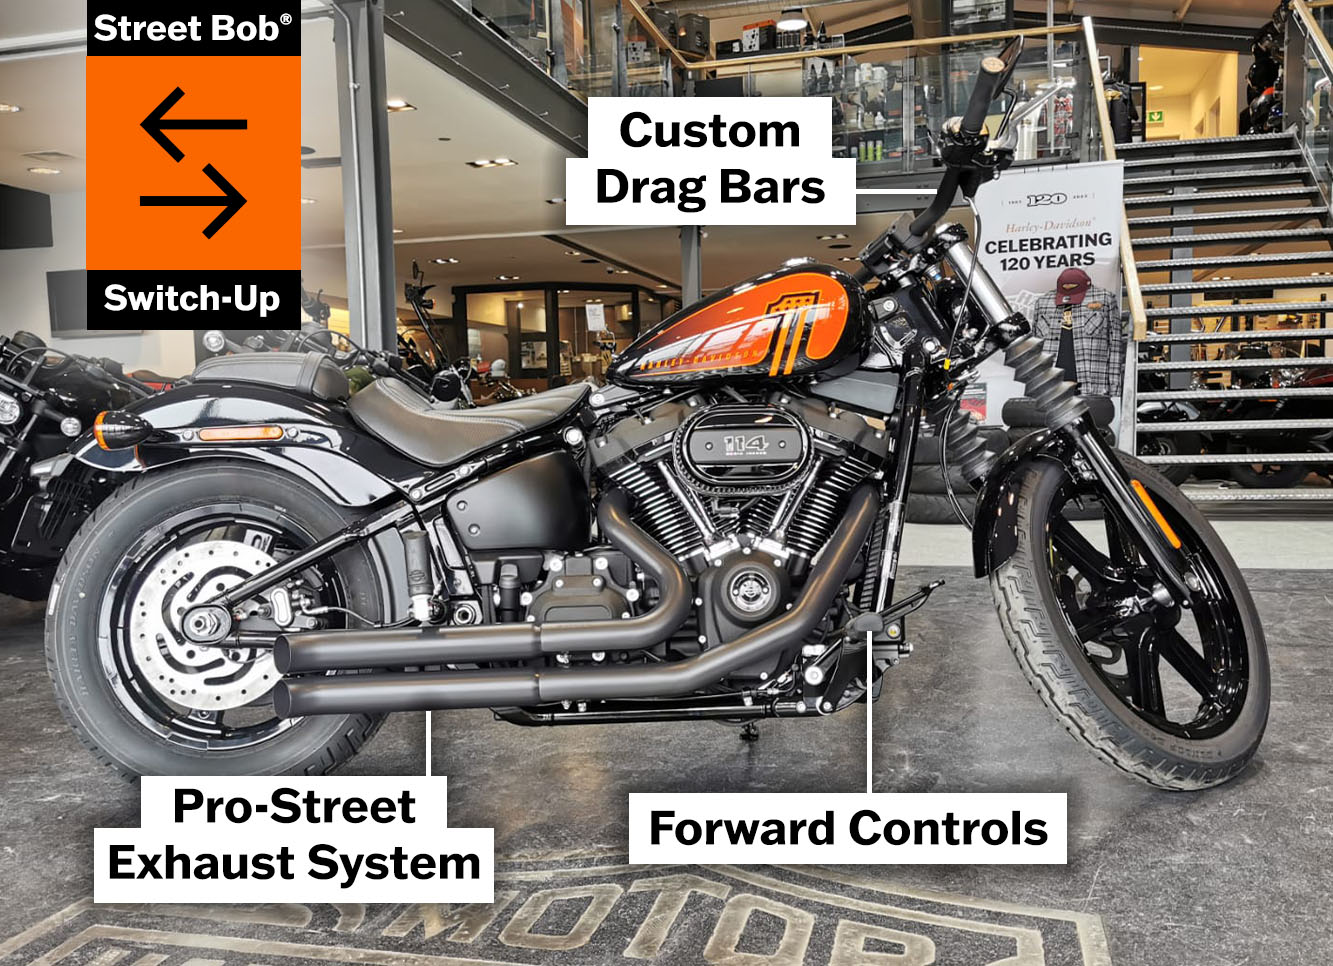 Switch-up the Street Bob with the best parts and accessories at Maidstone Harley-Davidson 